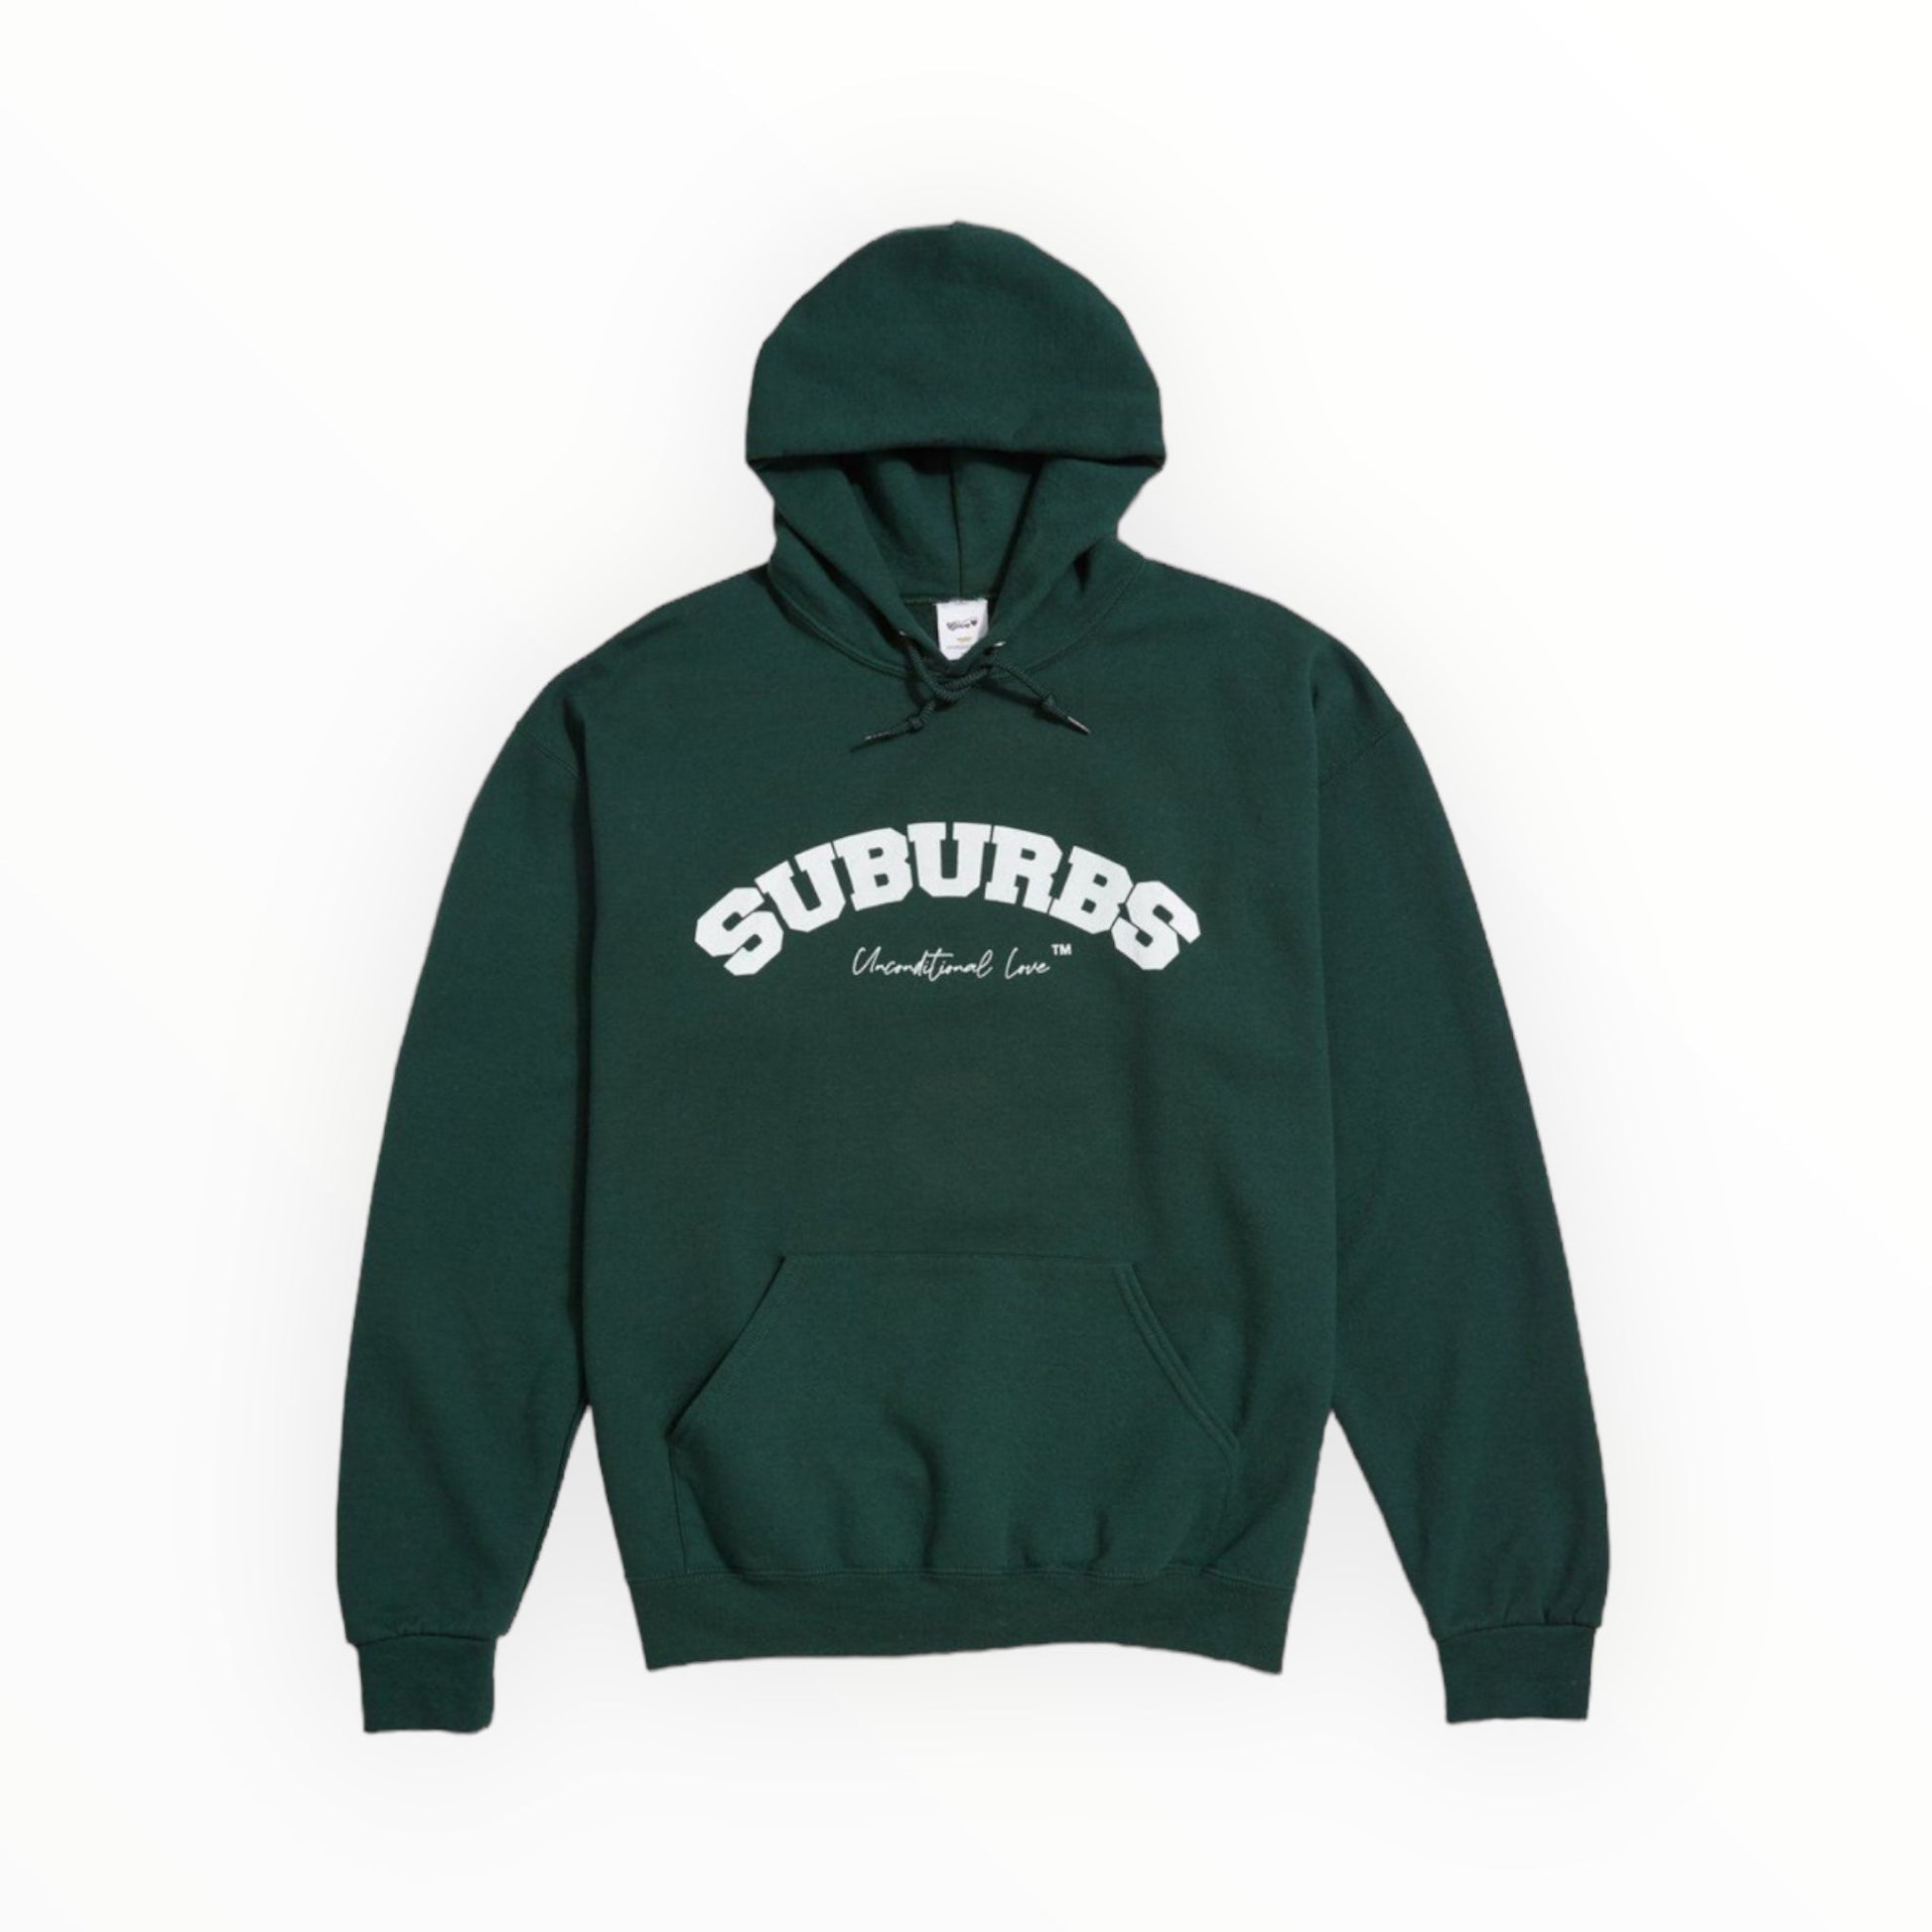 Suburbs Hoodie (green) - Something about Sofia